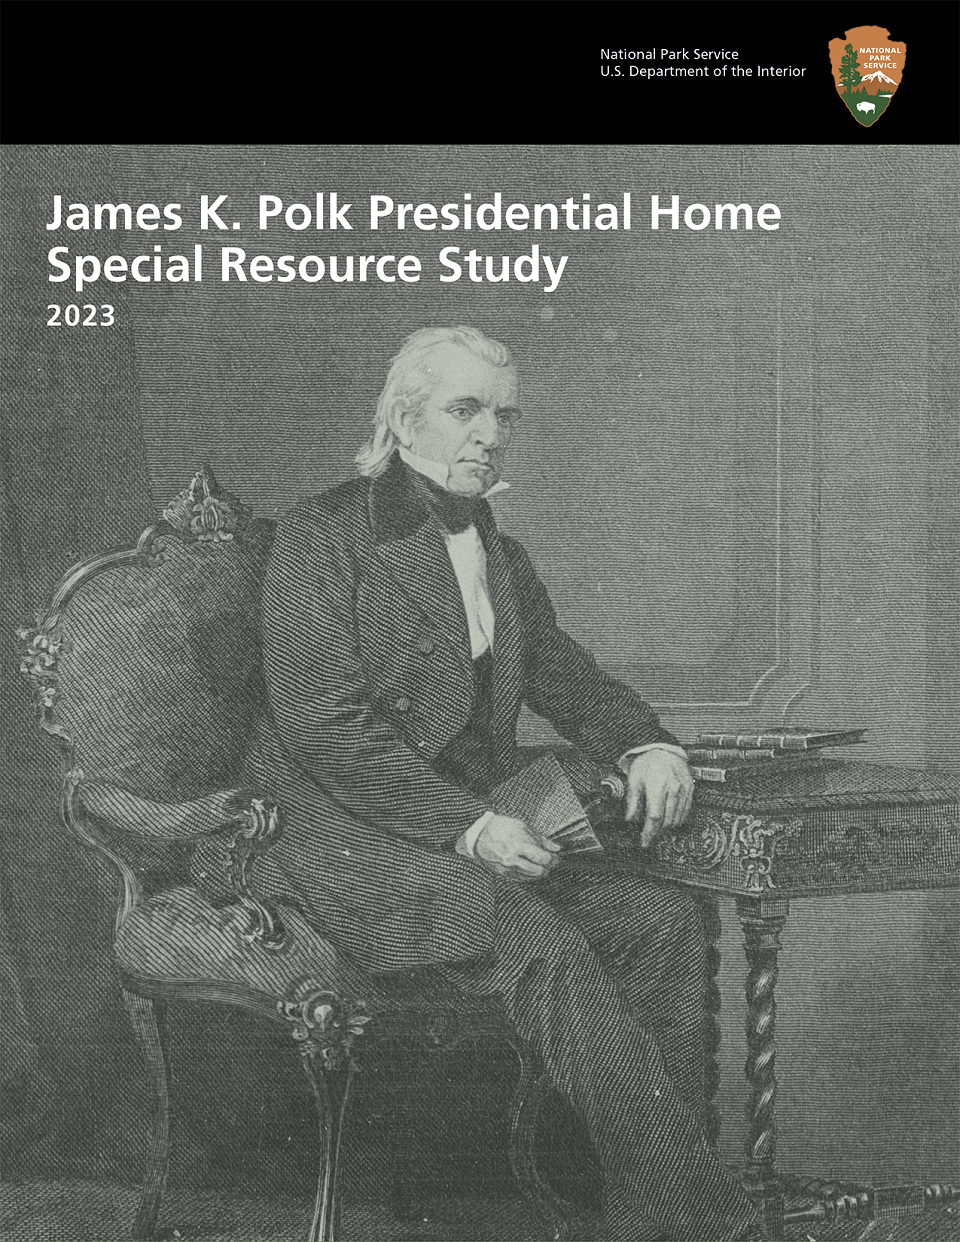 The cover of the James K. Polk Presidential Home Special Resource Study 2023 which displays an image of President James K. Polk.